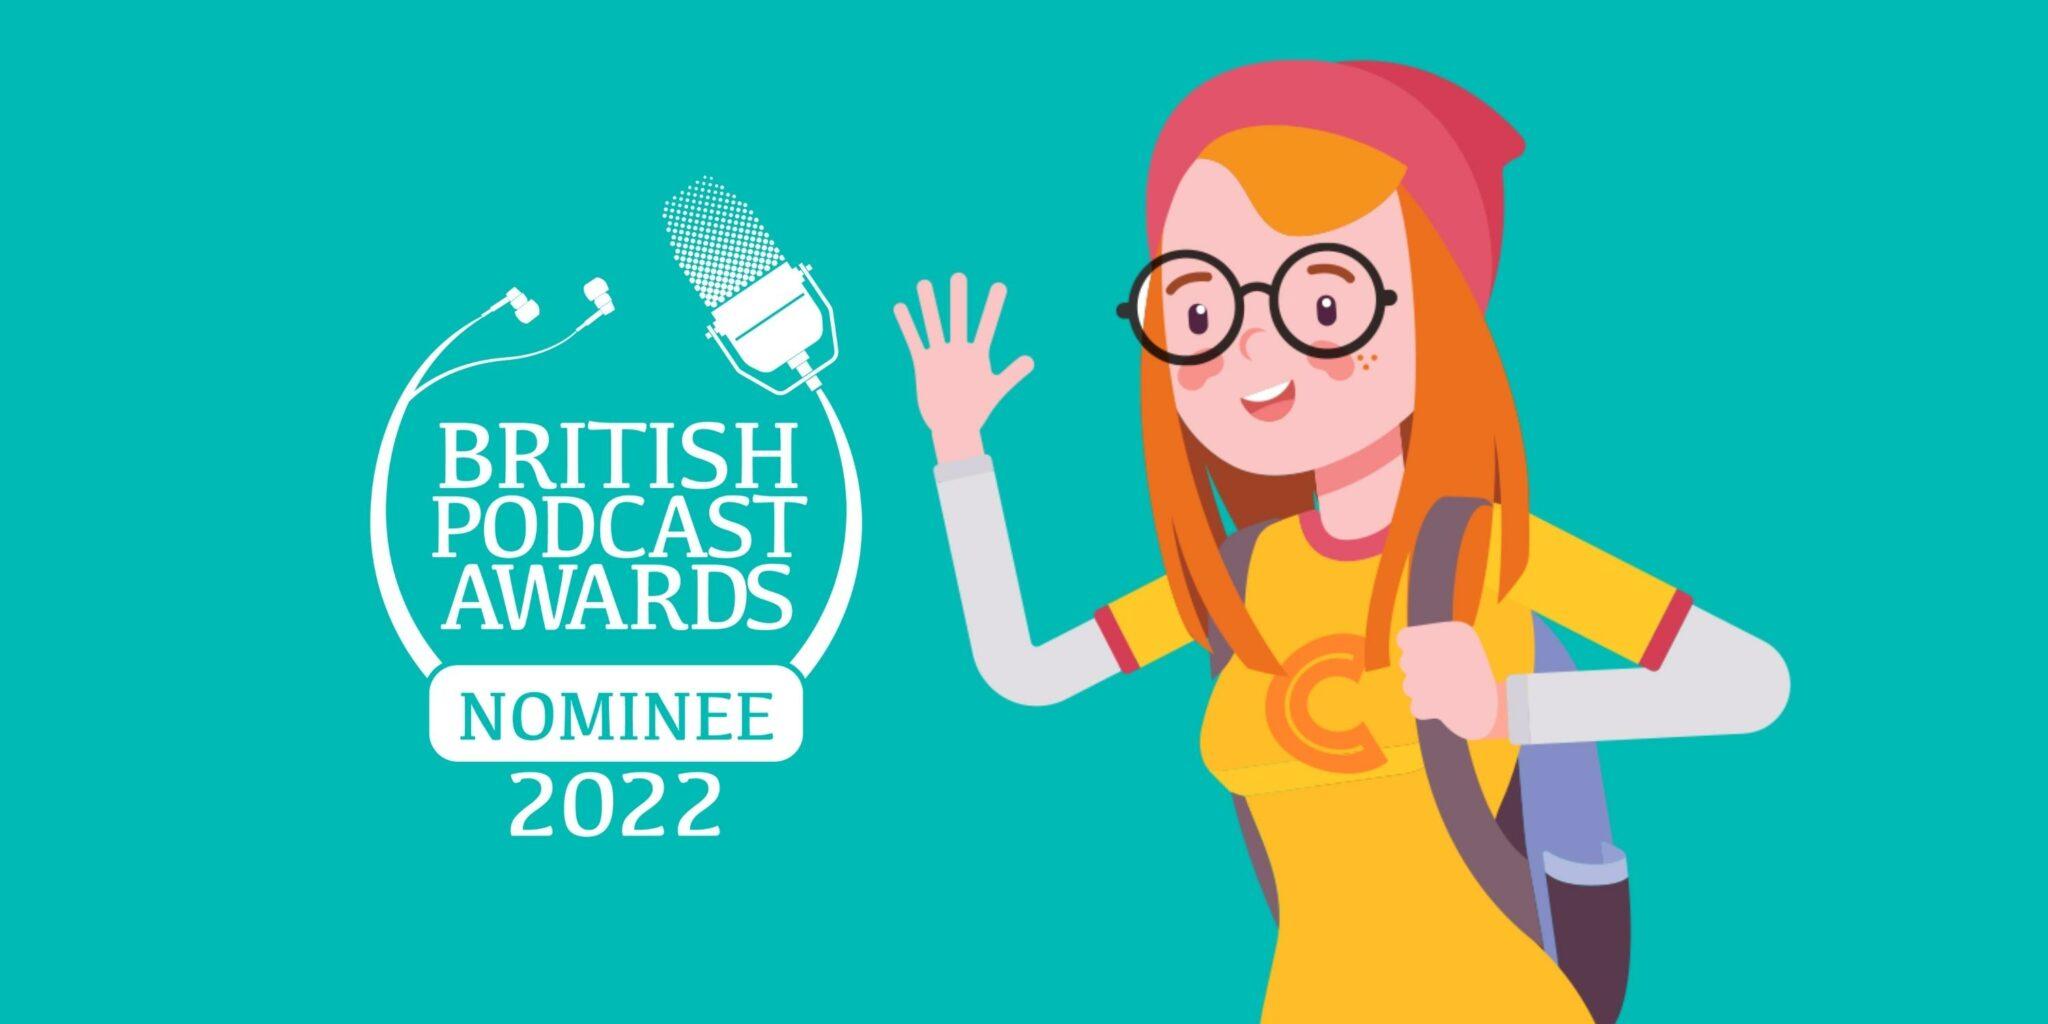 We've been nominated for the British Podcast Awards! made by mortals